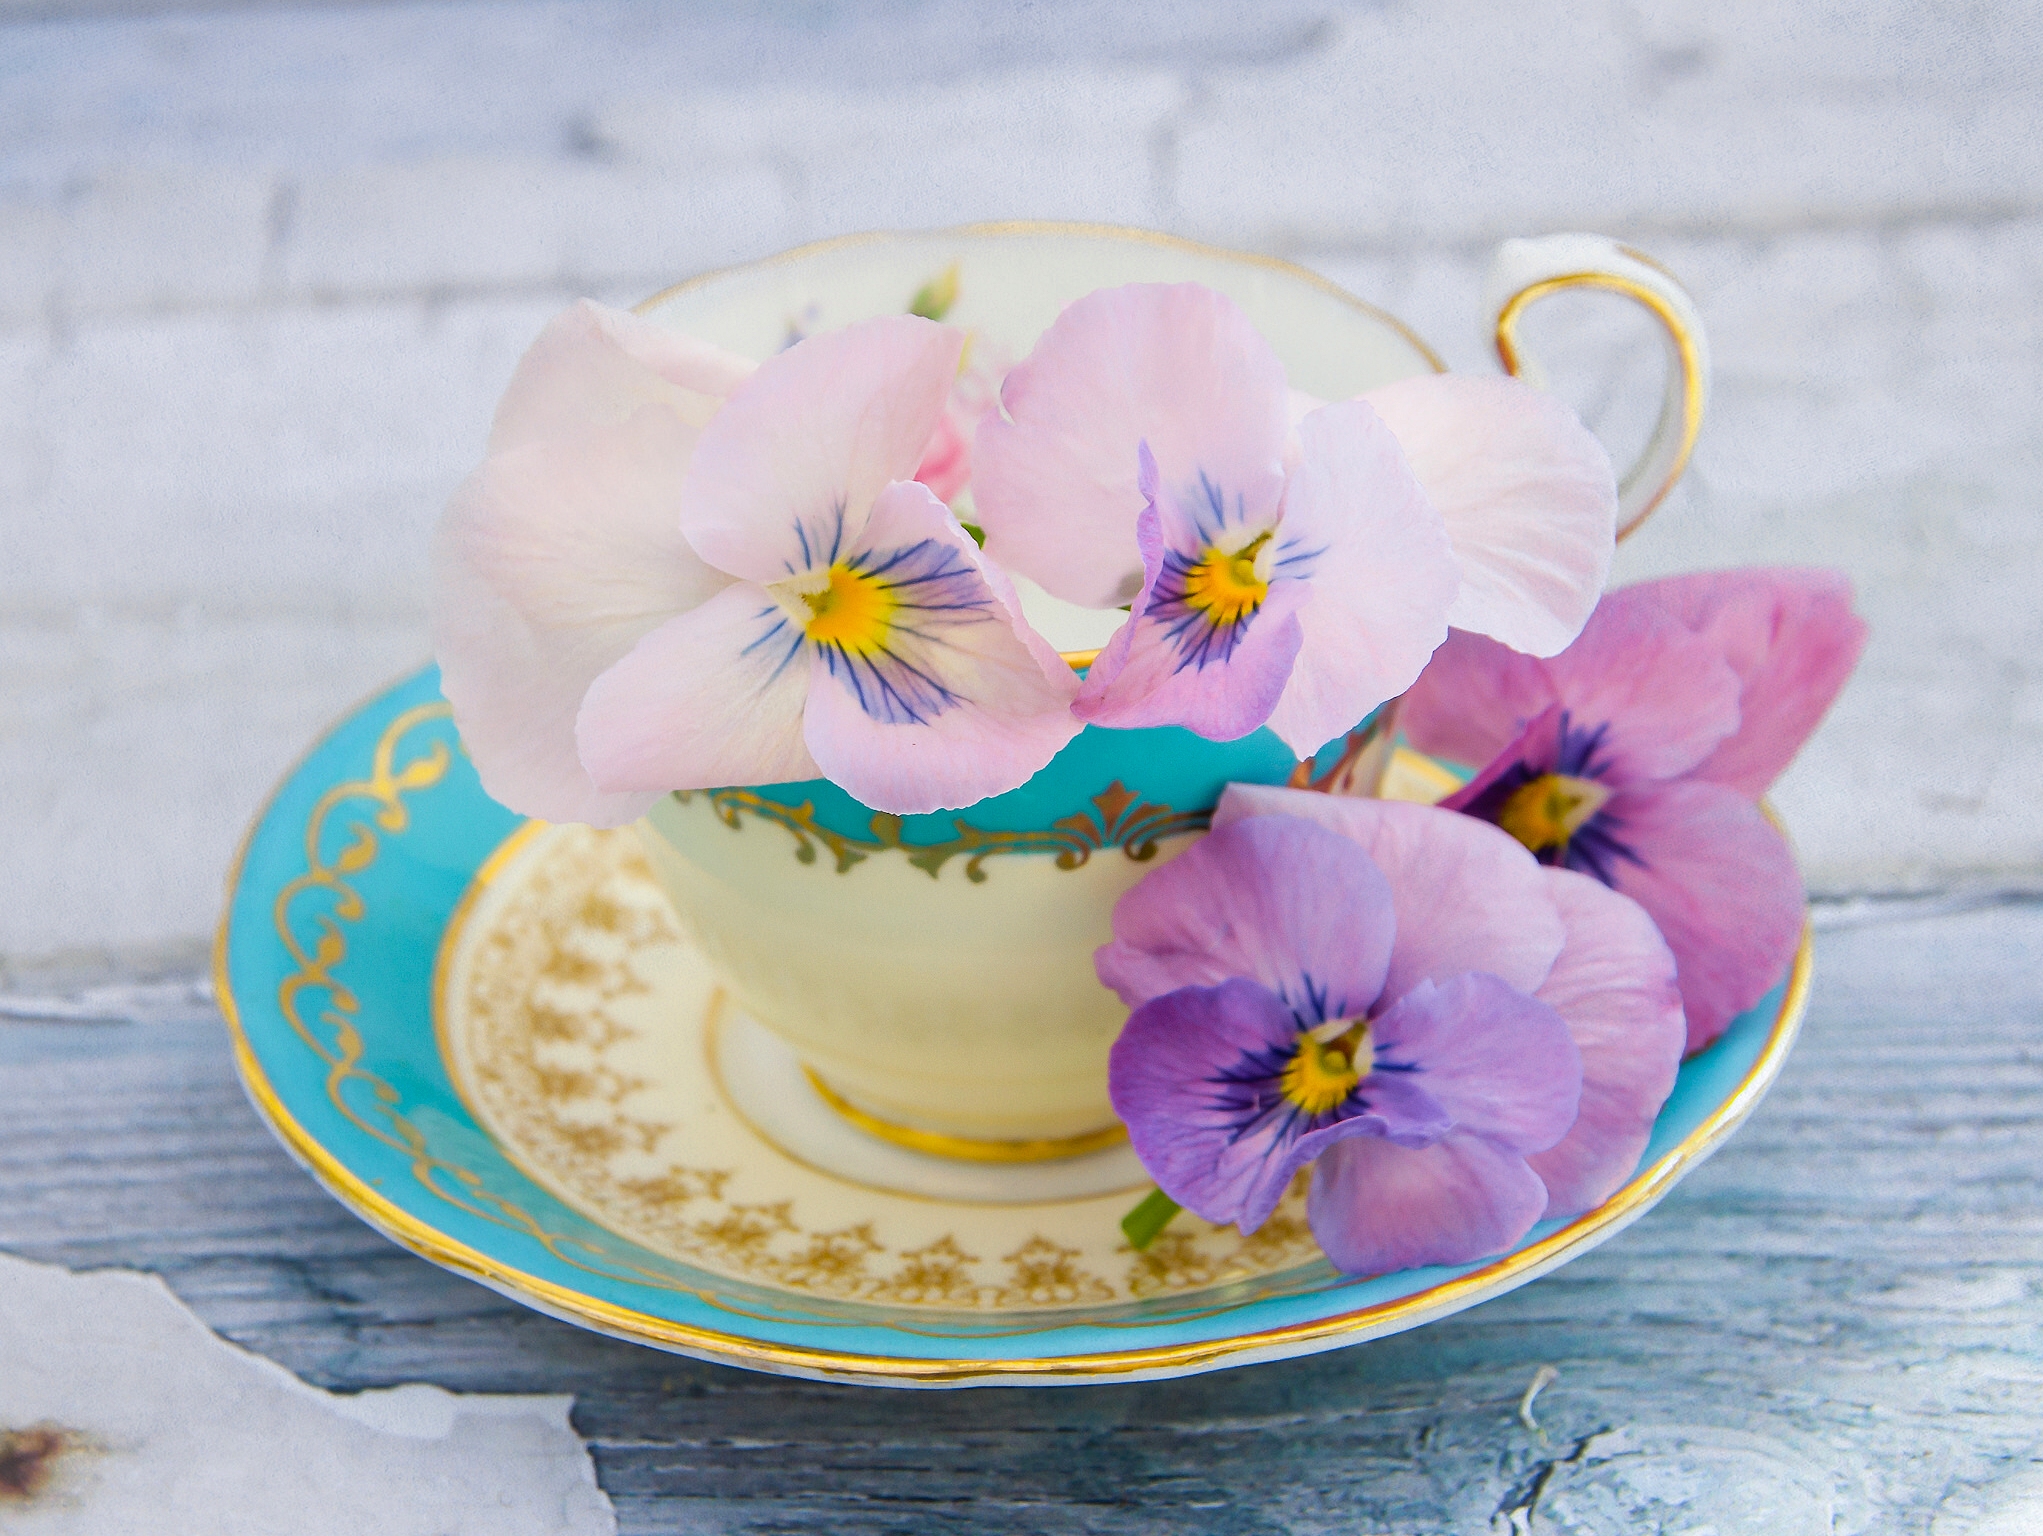 photography, still life, cup, pansy, purple flower, saucer iphone wallpaper